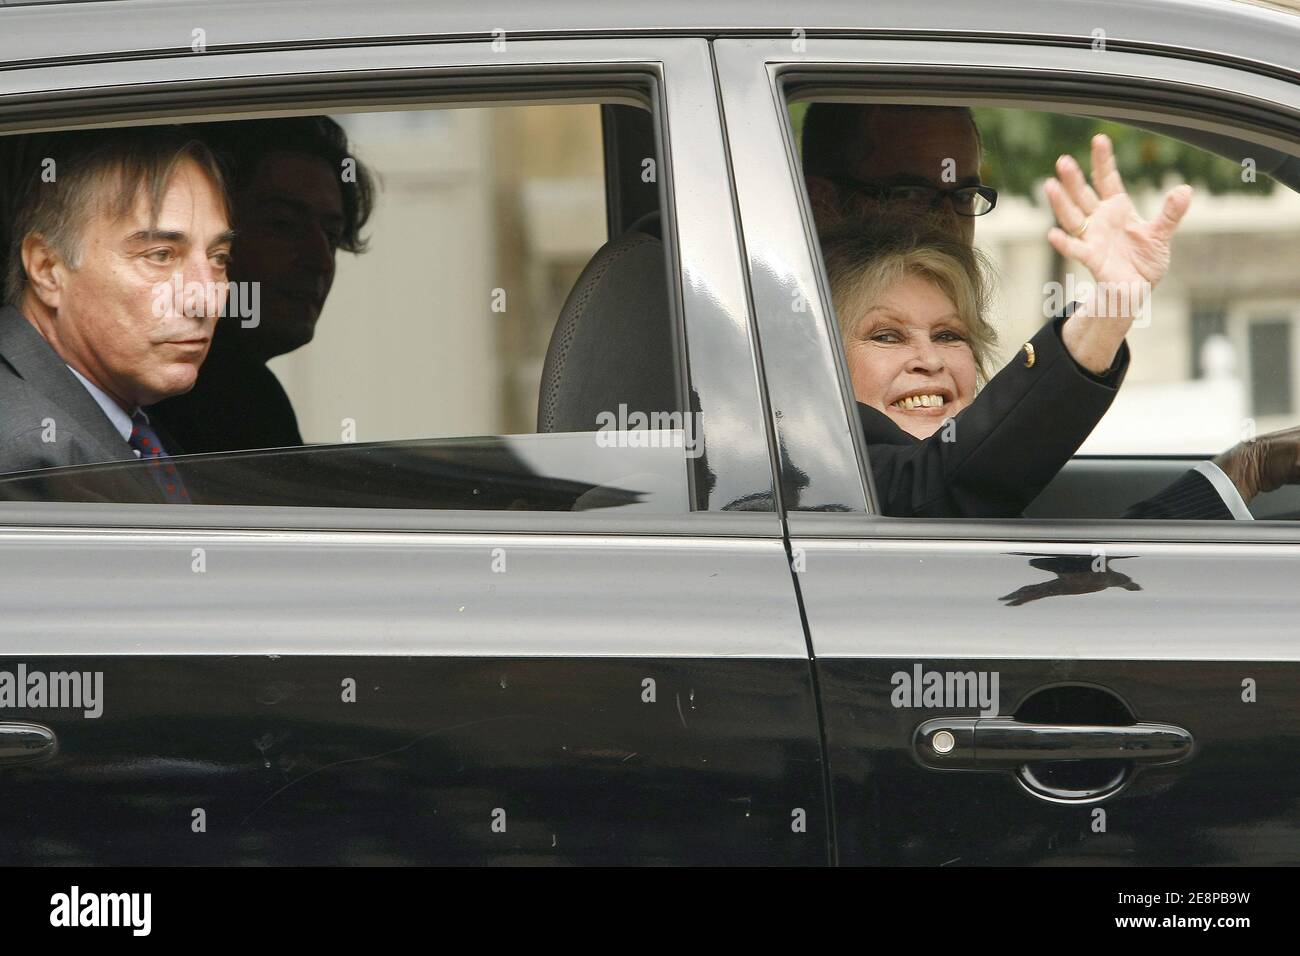 Movie legend turned animals rights activist Brigitte Bardot leaves the  Elysee Palace in Paris, France on September 27, 2006, along with head of  Birds Protection League Allain Bougrain-Dubourg, after a meeting on